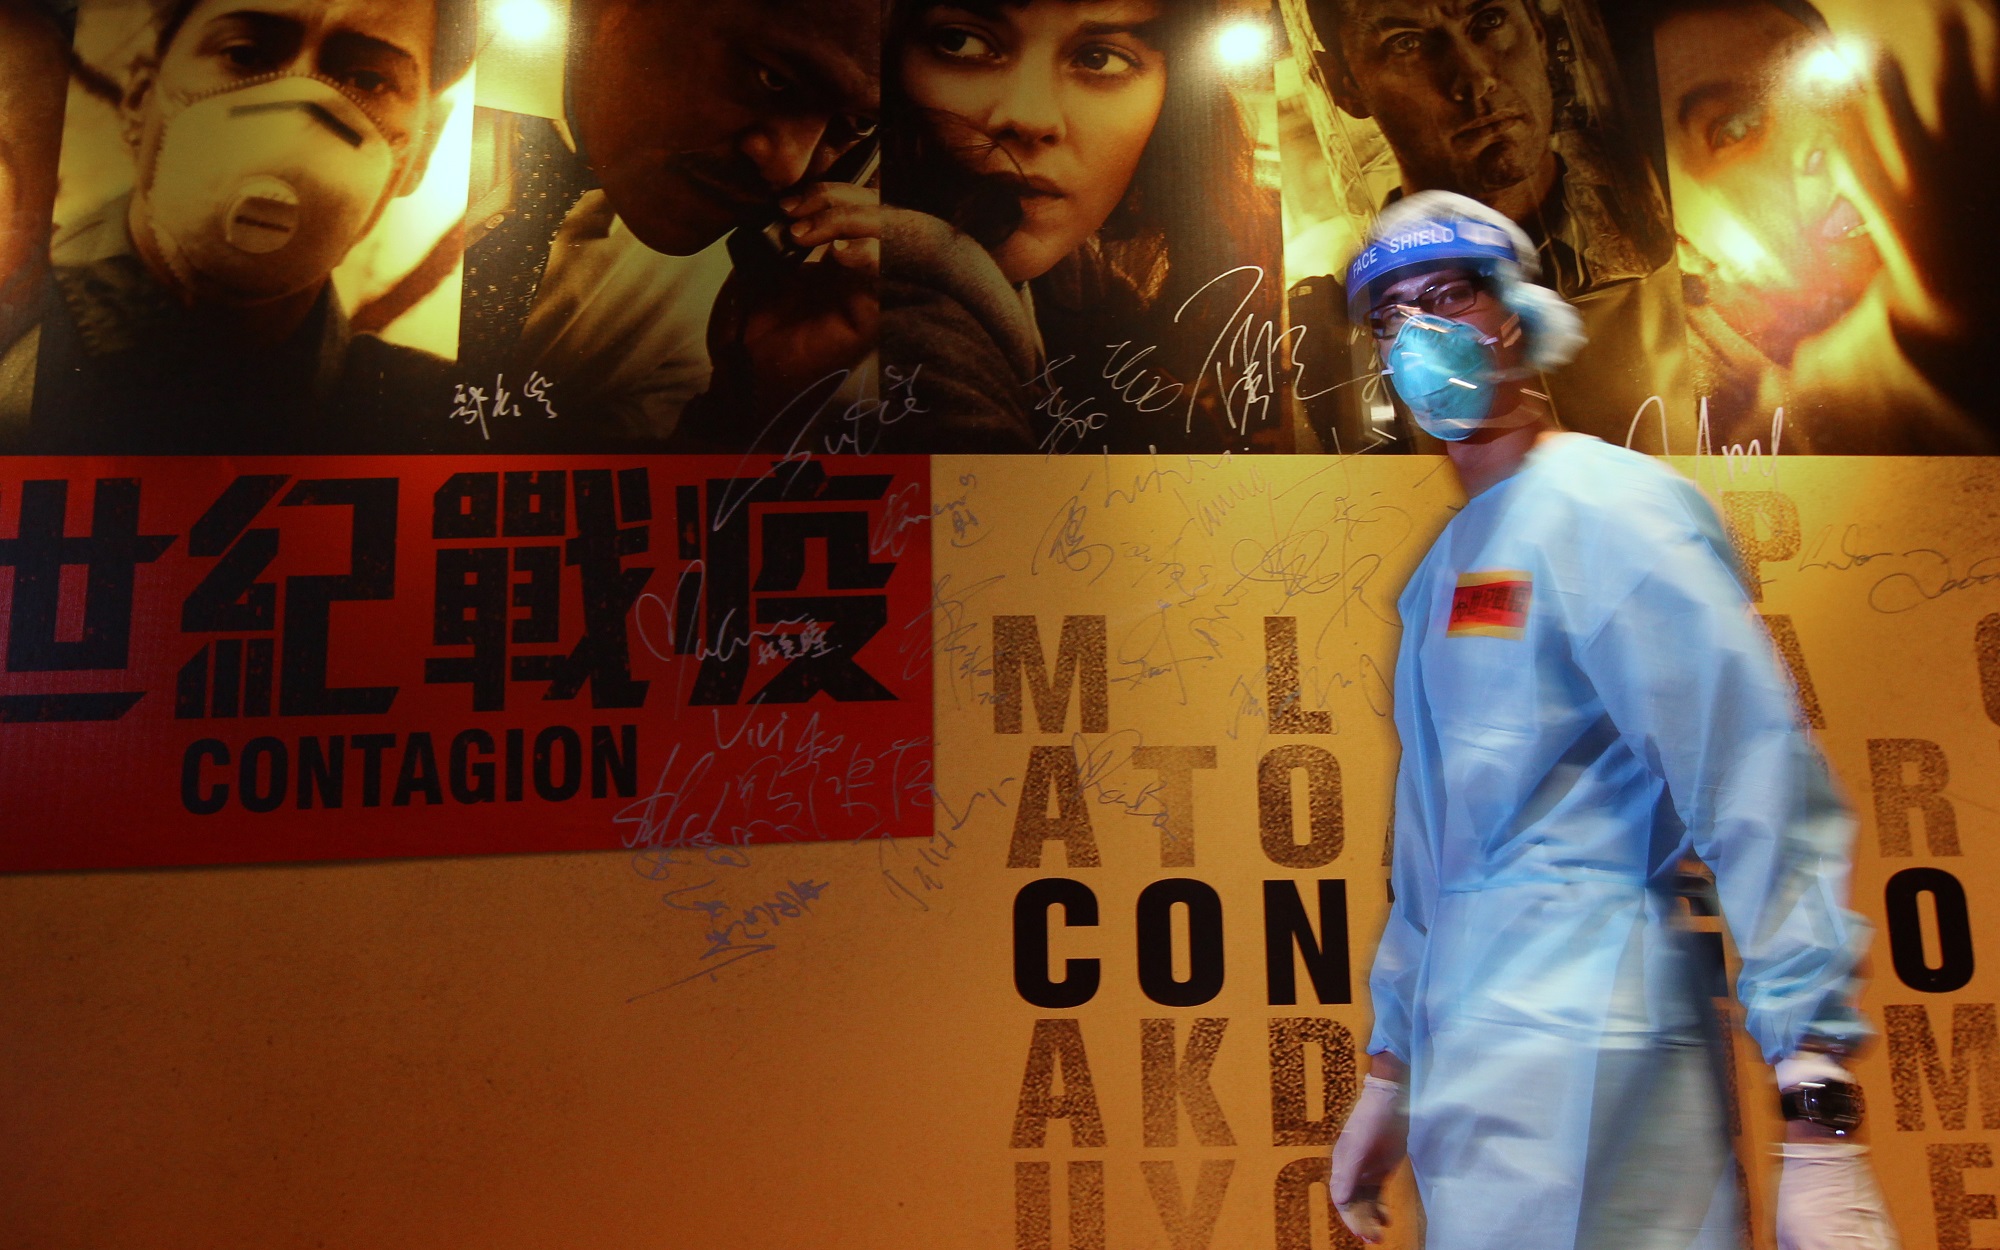 Hong Kong premiere of 'Contagion' in 2011